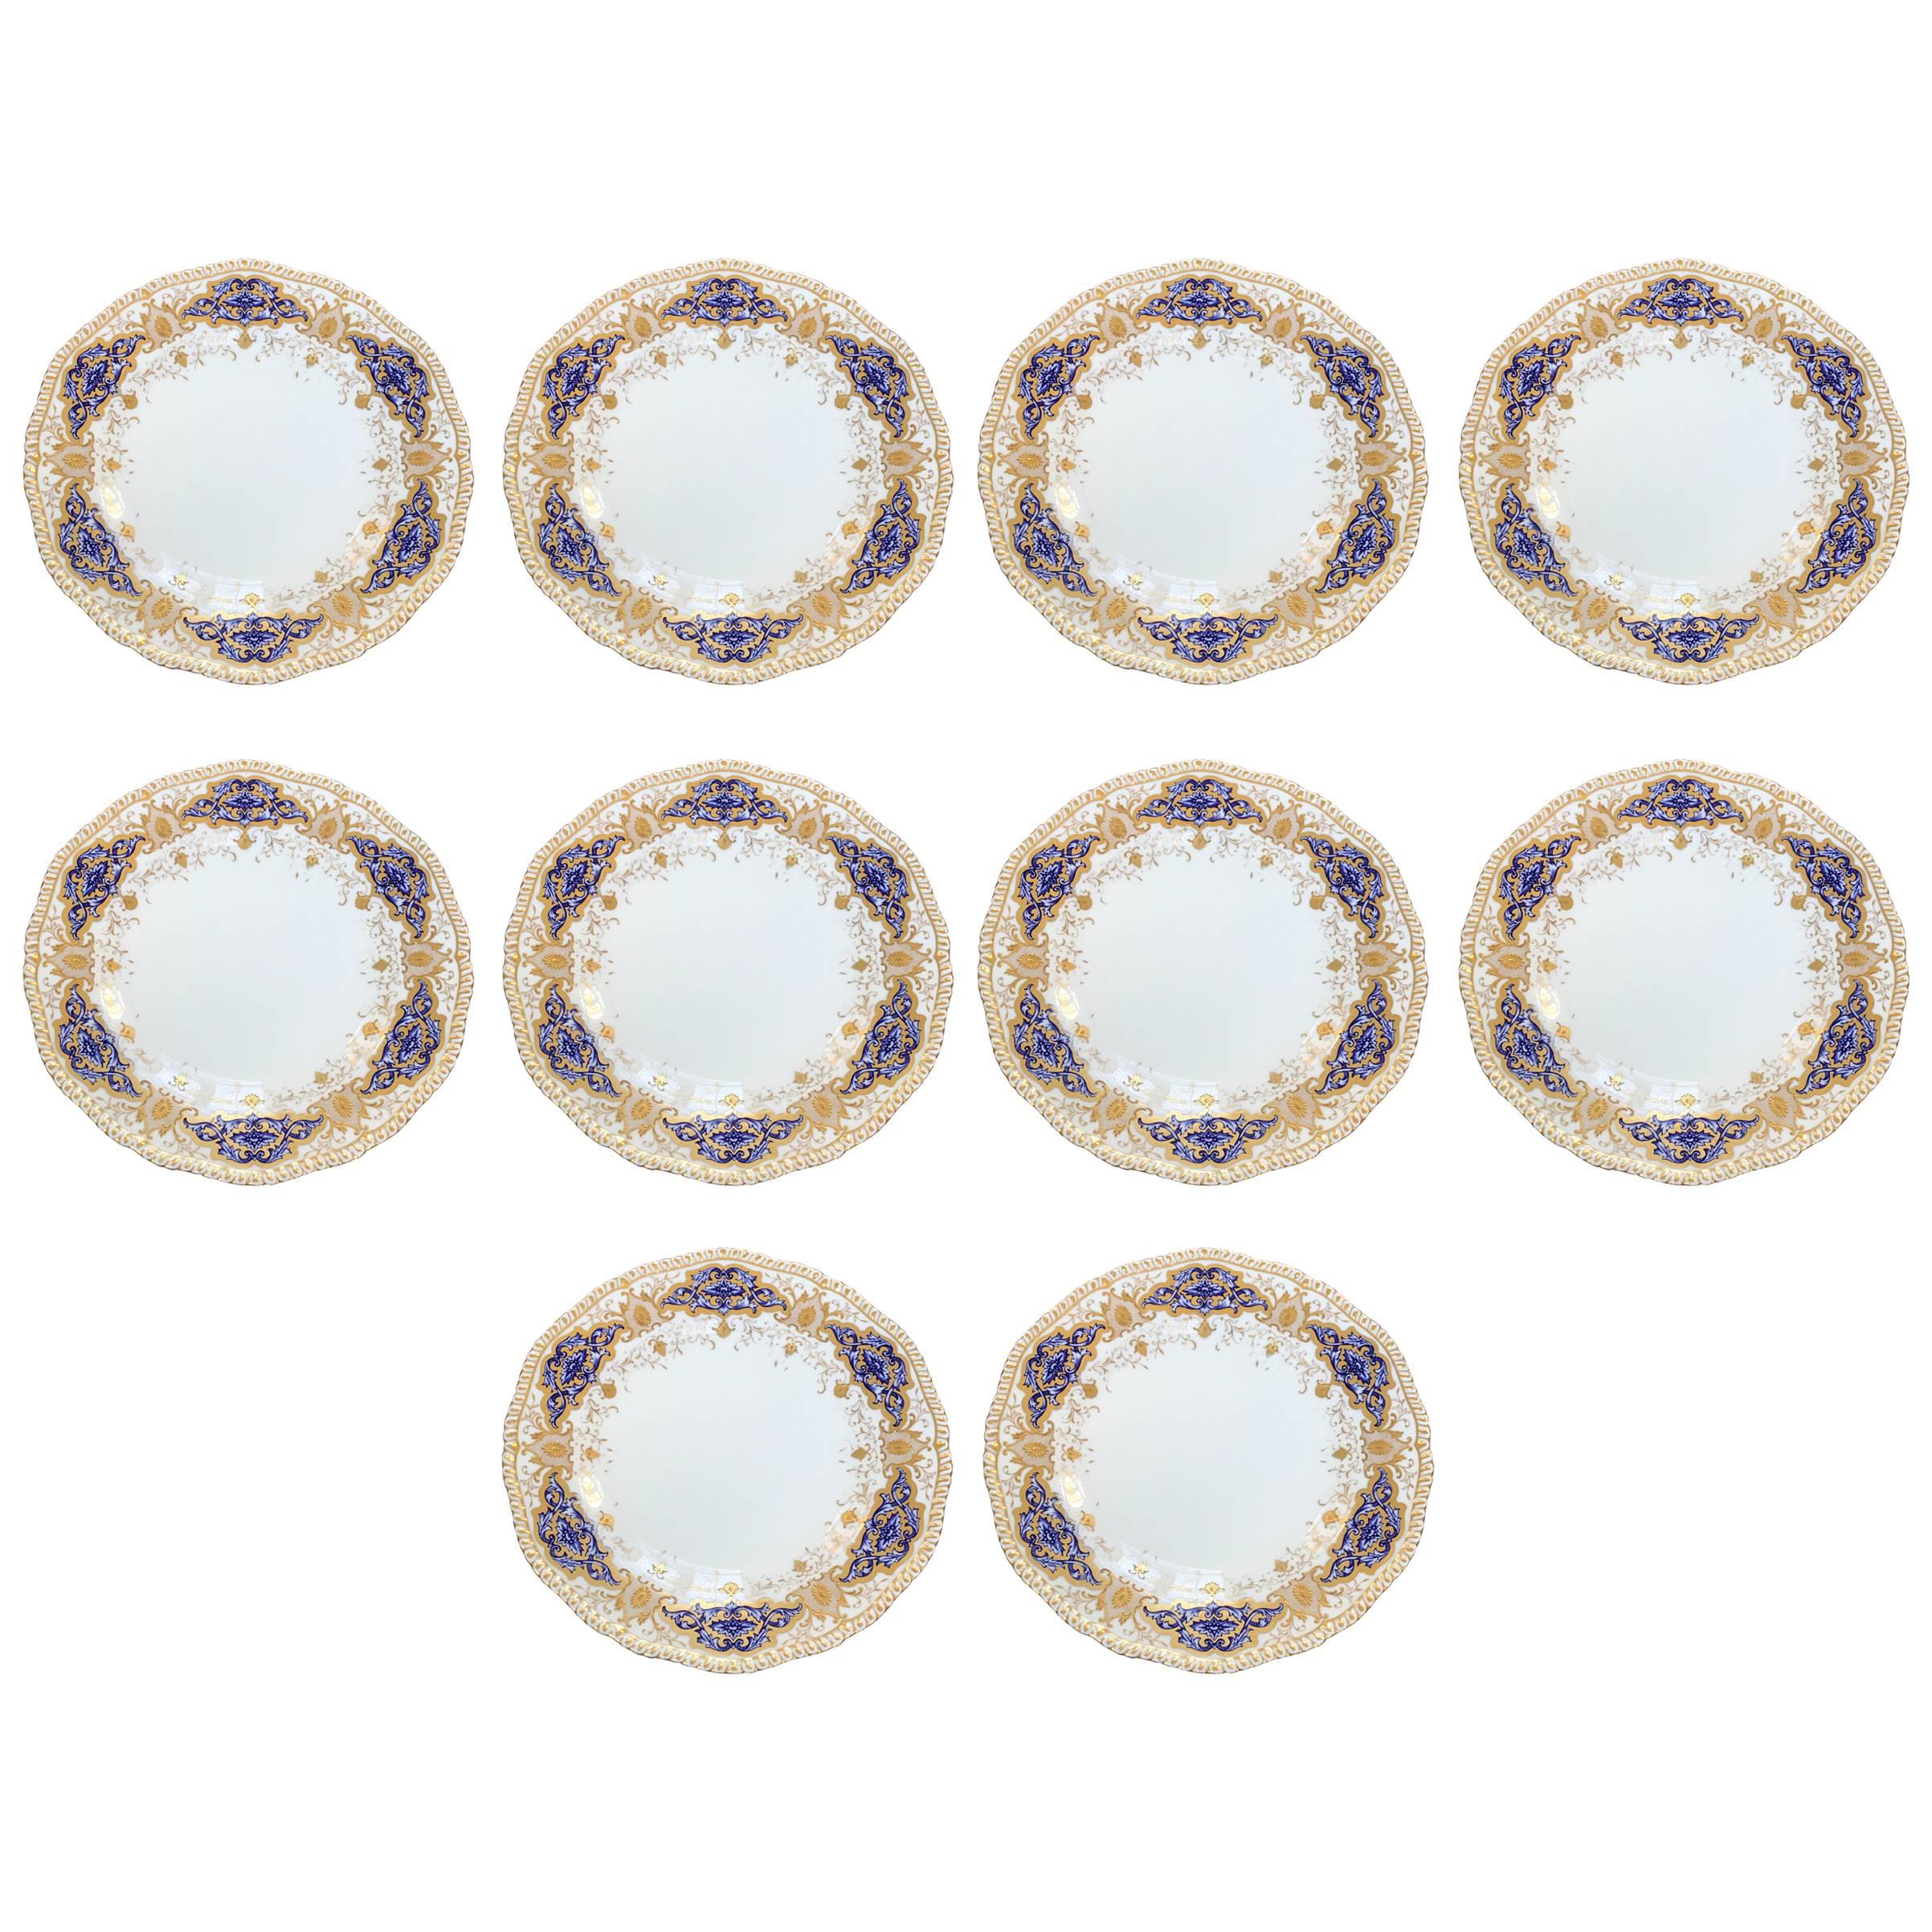 This gorgeous set of 10 coalport dinner plates were made in England, circa 1890-1900 for Spaulding & Co. Chicago as the retailer. 
They are beautifully decorated in a foliate design in flat and raised gold framing cobalt blue cartouches.
The